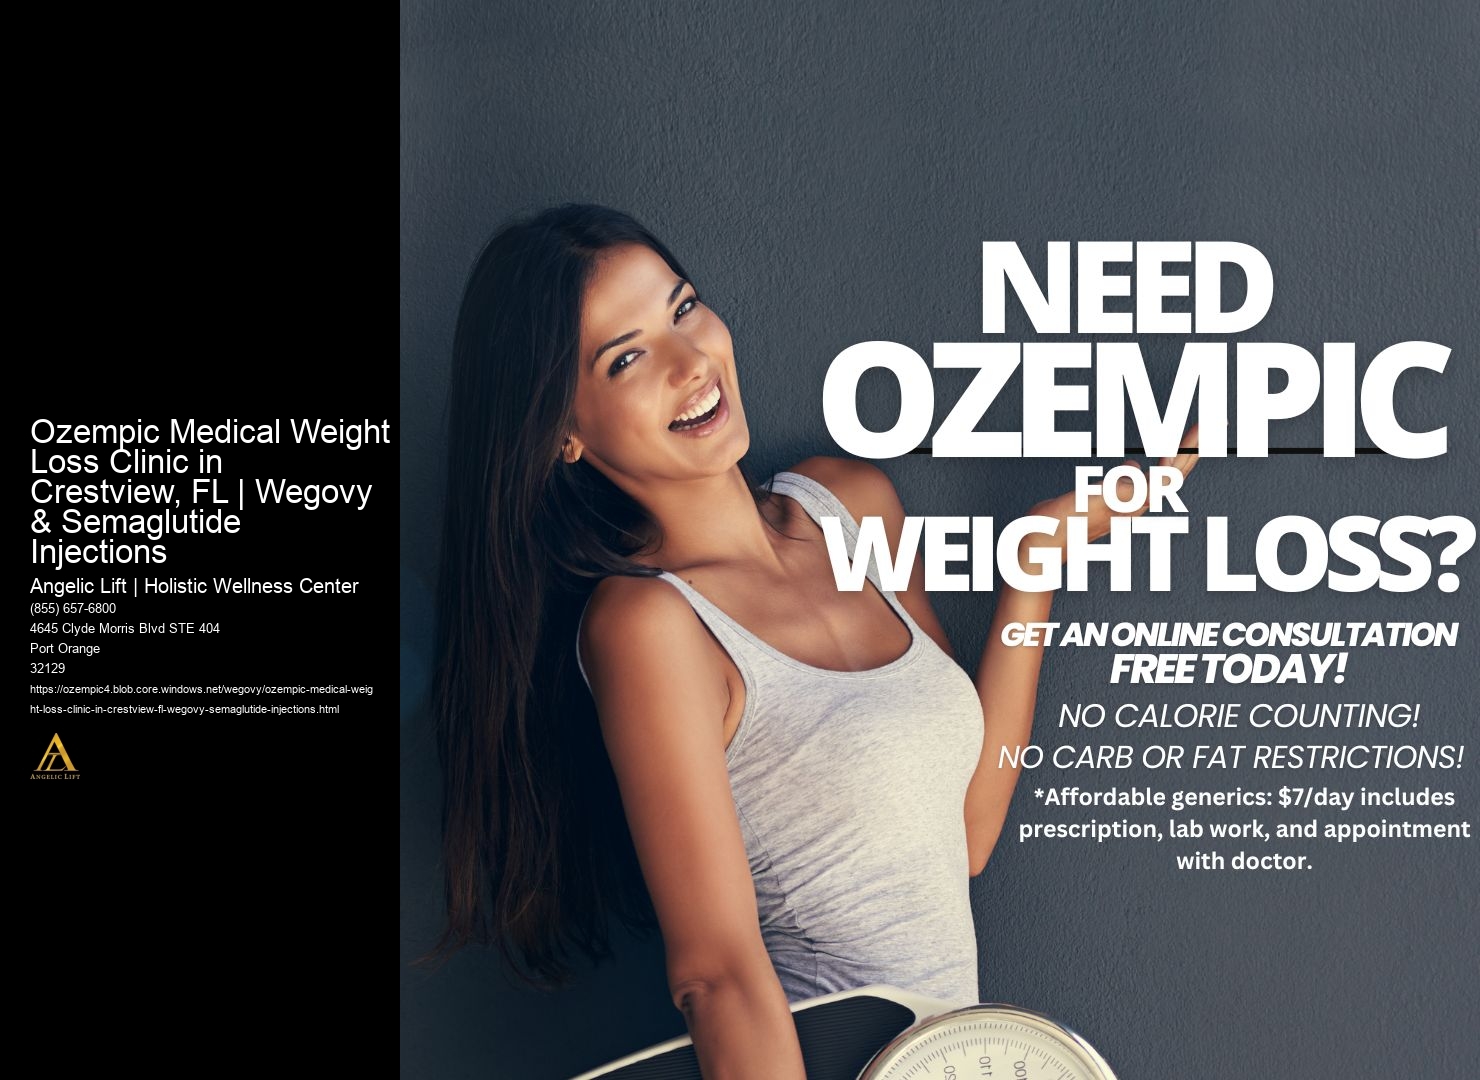 Ozempic Medical Weight Loss Clinic in Crestview, FL | Wegovy & Semaglutide Injections